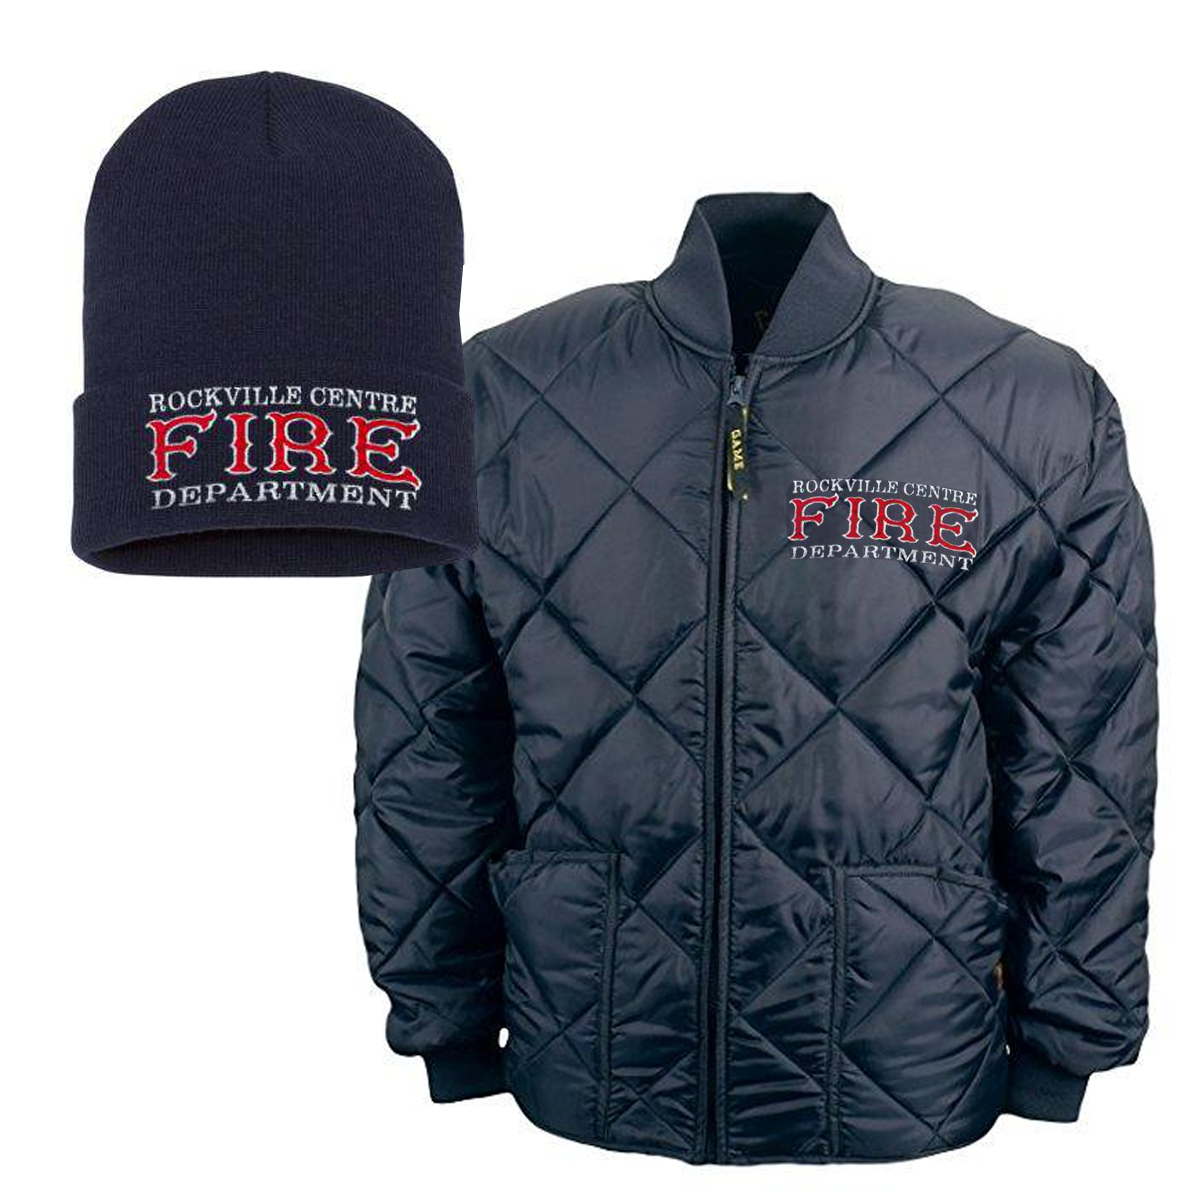 Bravest Jacket & Beanie Package Deal Old Style